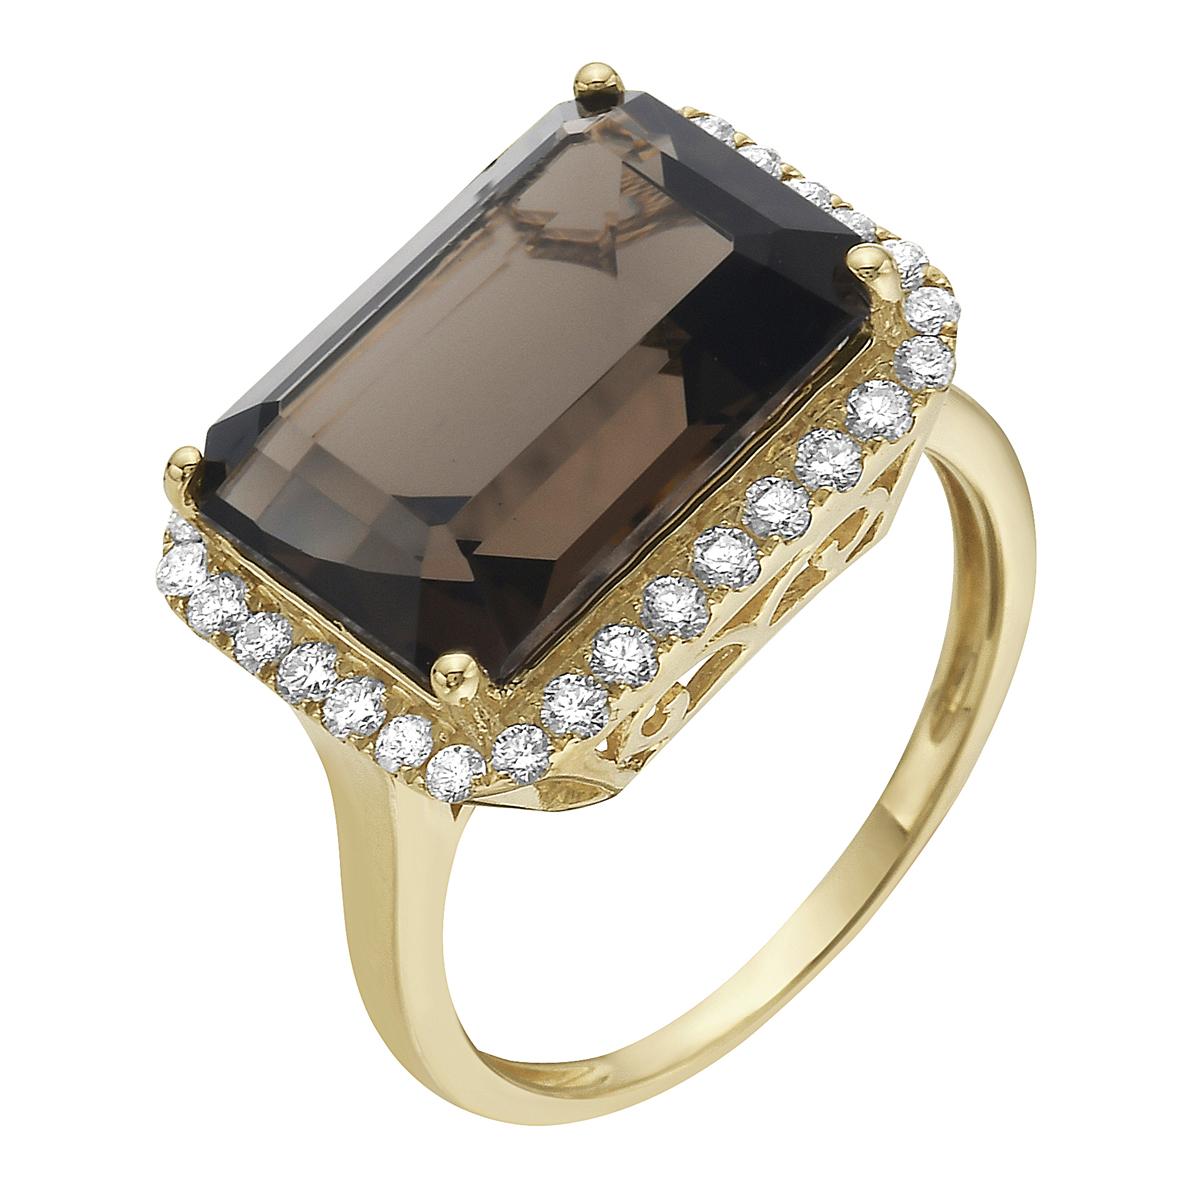 With this exquisite semi-precious smokey quartz yellow gold diamond ring, style and glamour are in the spotlight. This 14-karat emerald cut ring is made from 3.5 grams of gold, 1 smokey quartz totaling 6.61 karats, and is surrounded by 32 round